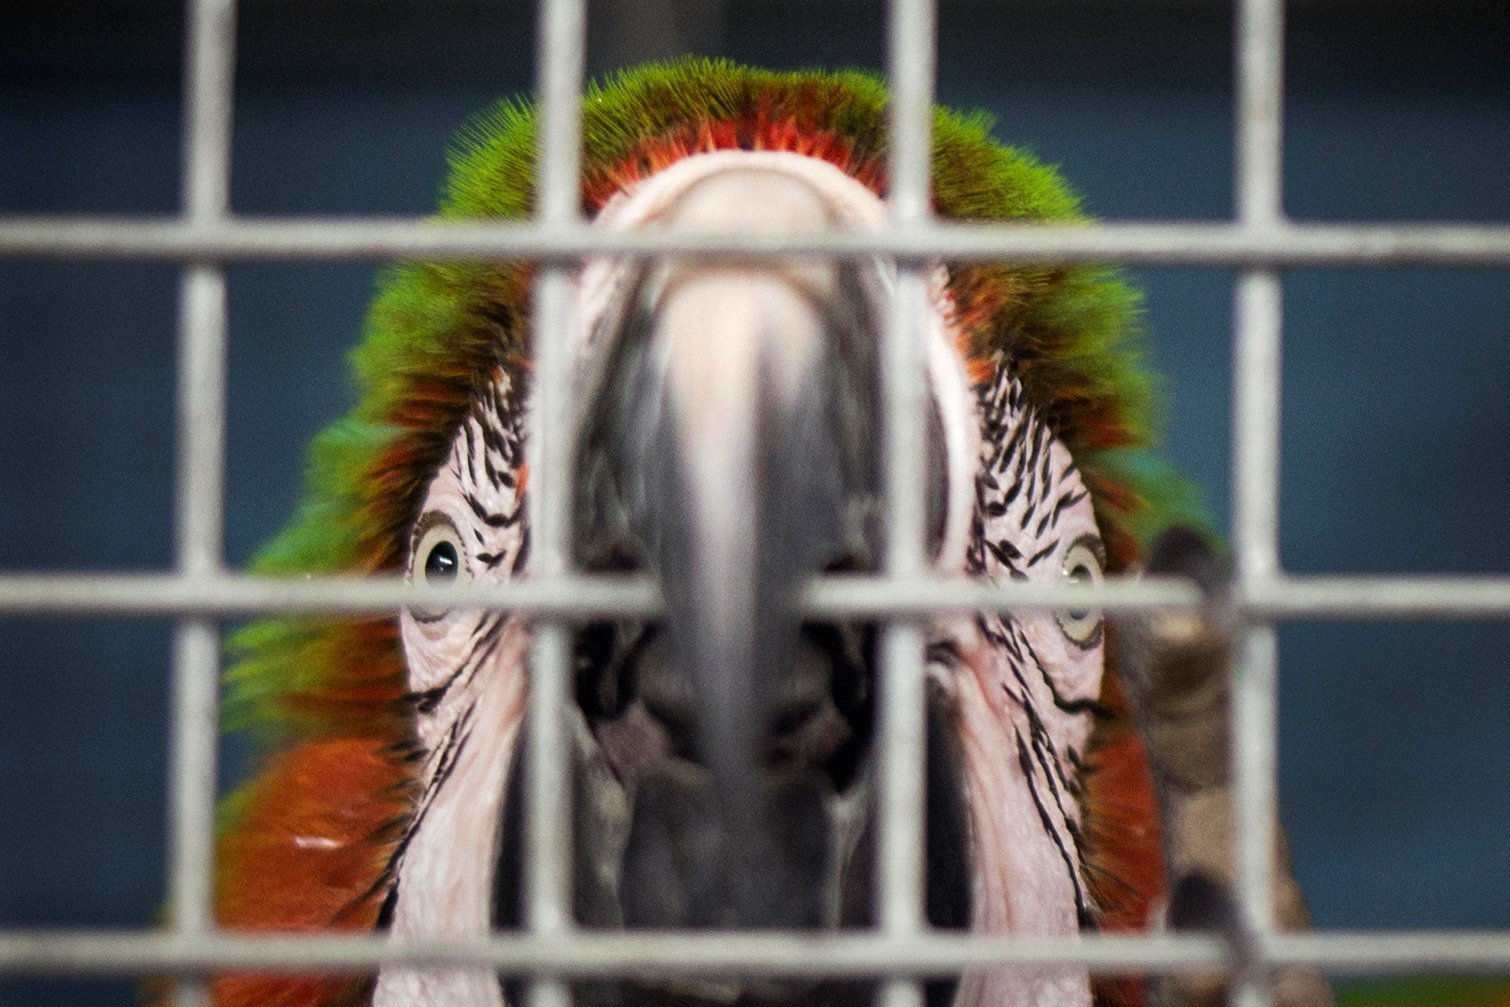 A parrot looks out of its cage after being put into a shelter ahead of Hurricane Irma. Photo: Reuters